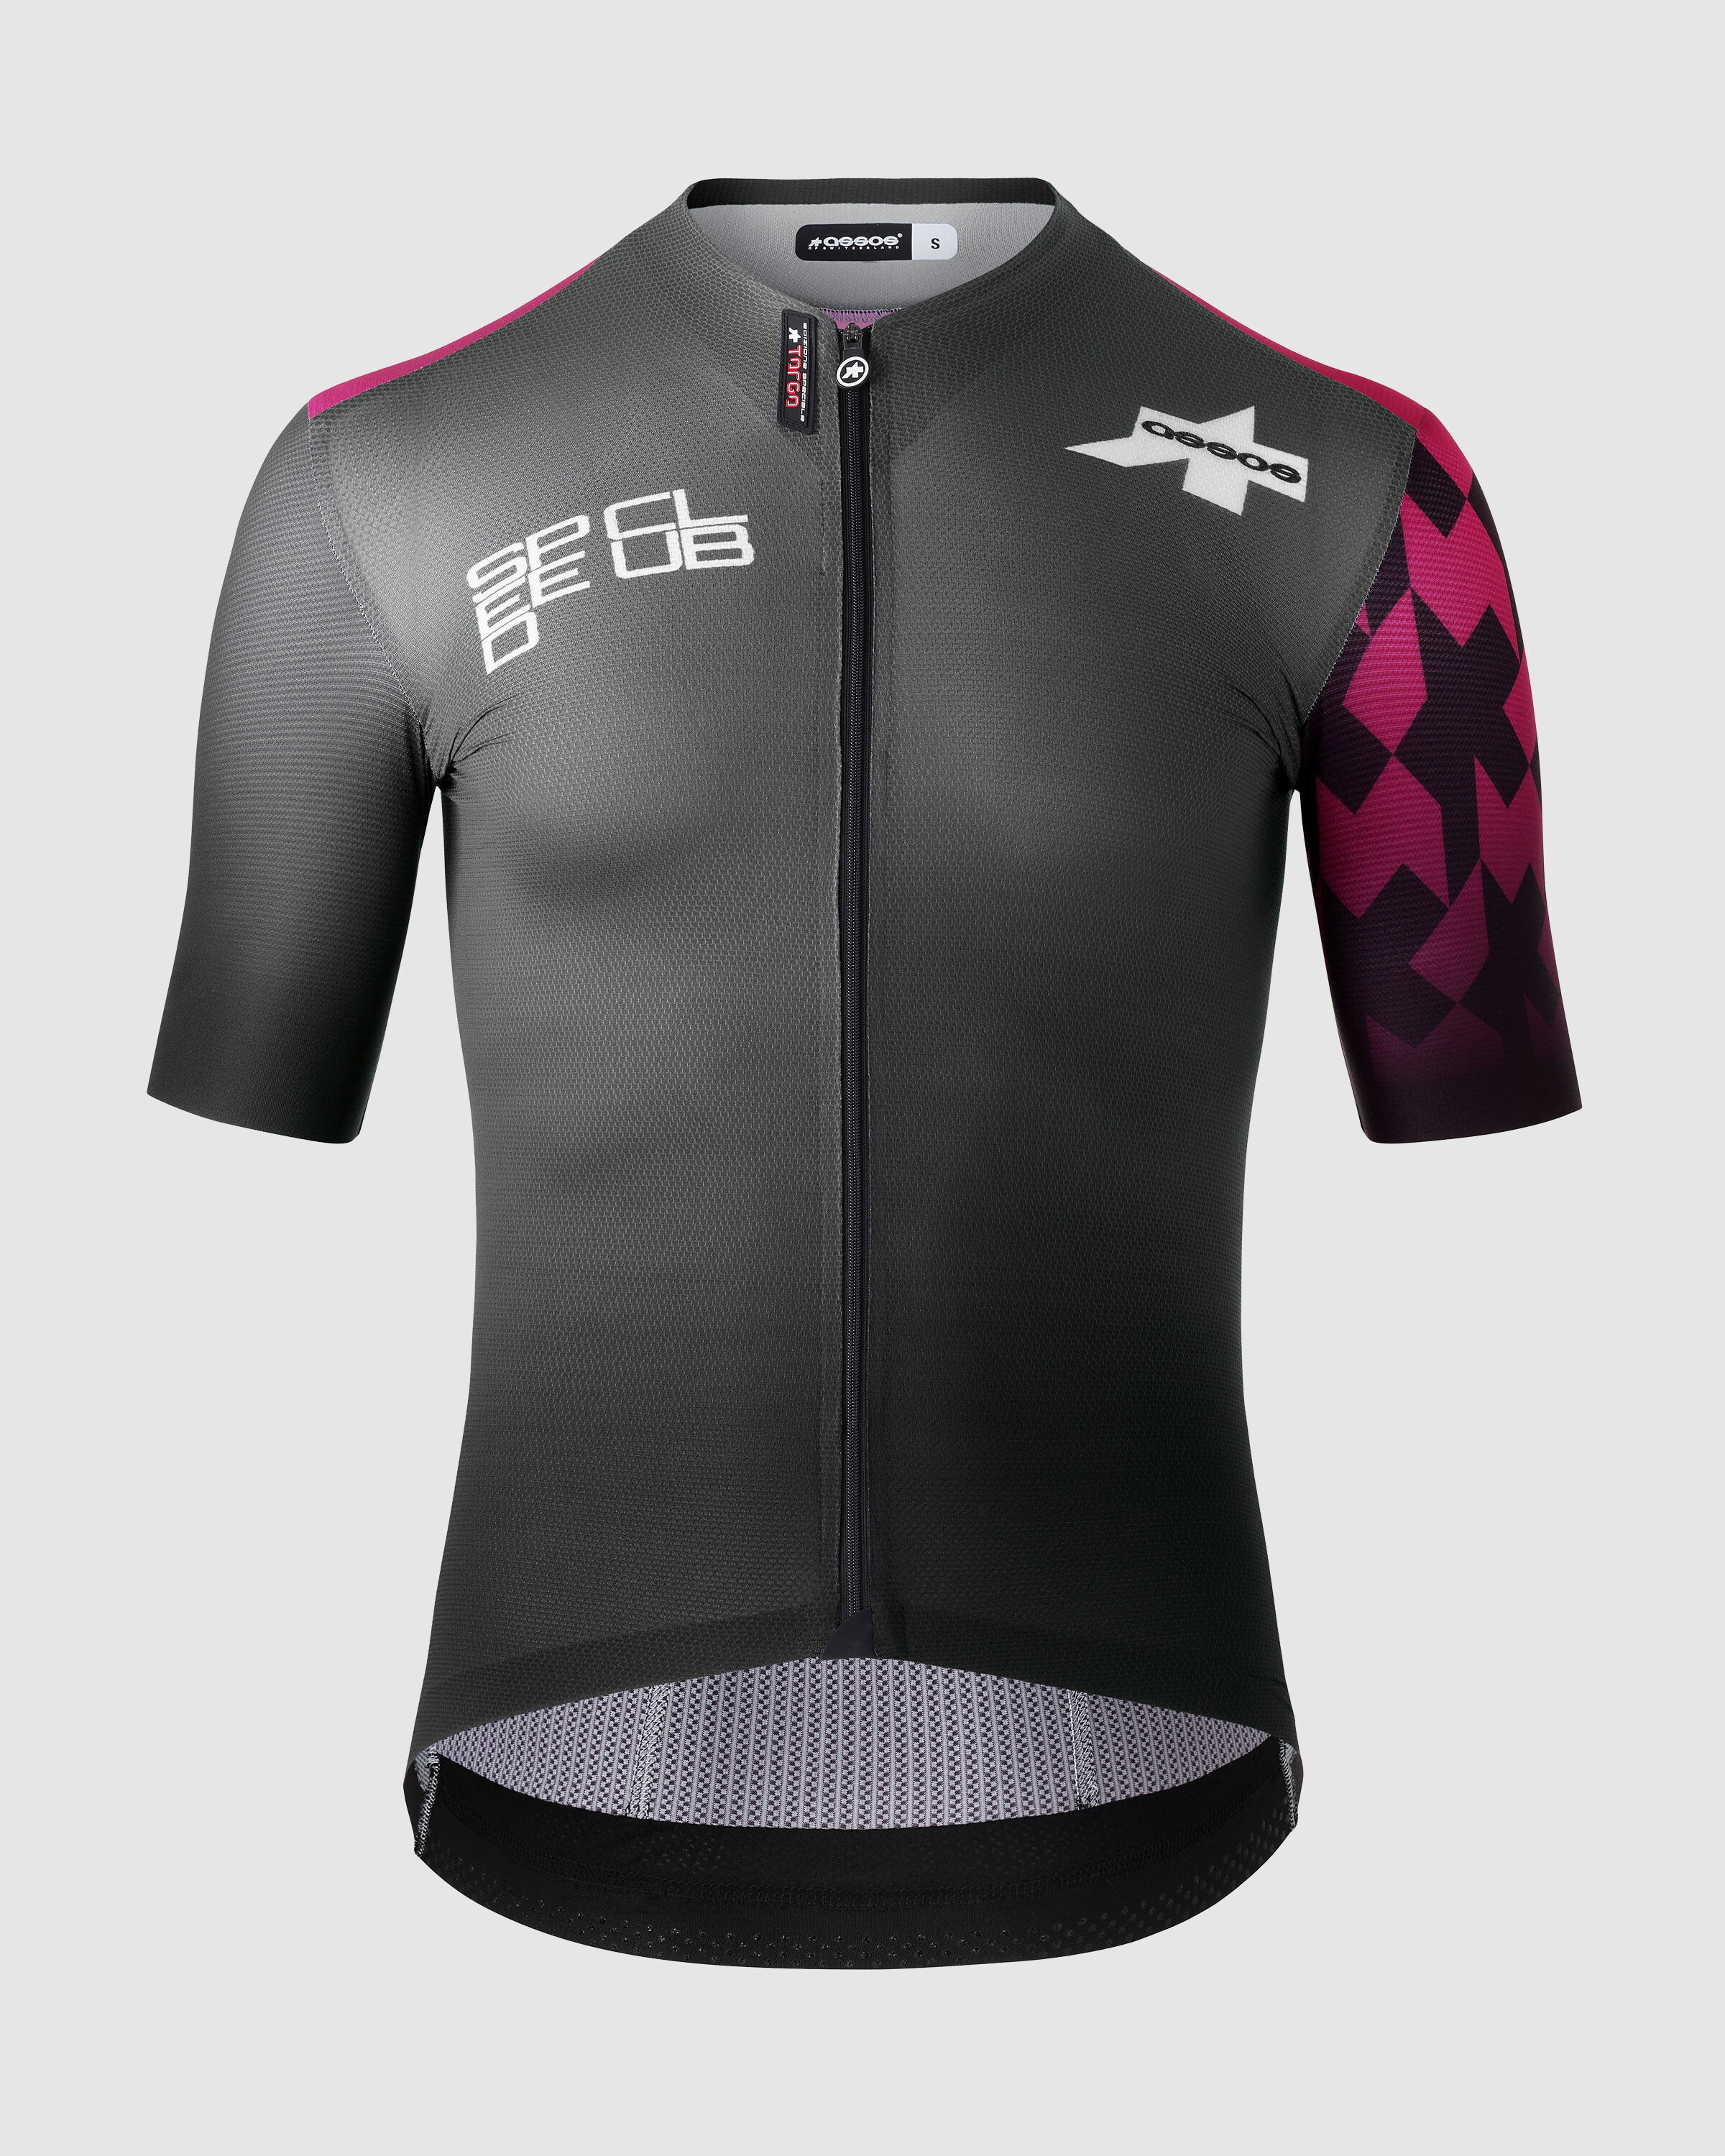 EQUIPE RS JERSEY S9 TARGA – SPEED CLUB 2022 - ASSOS Of Switzerland - Official Outlet